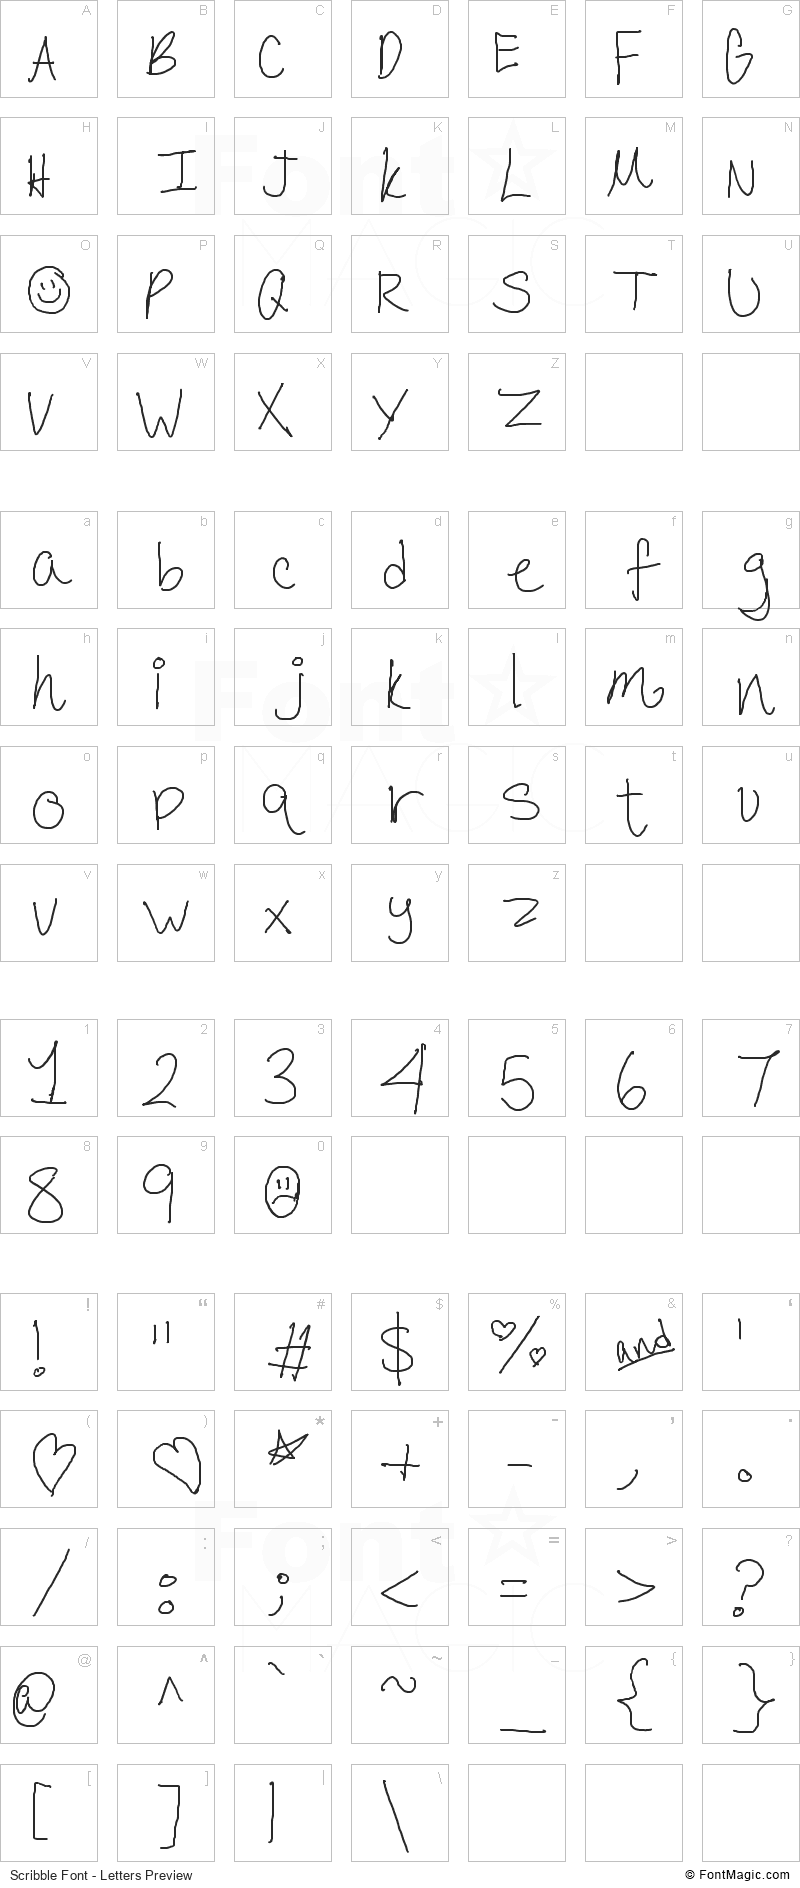 Scribble Font - All Latters Preview Chart